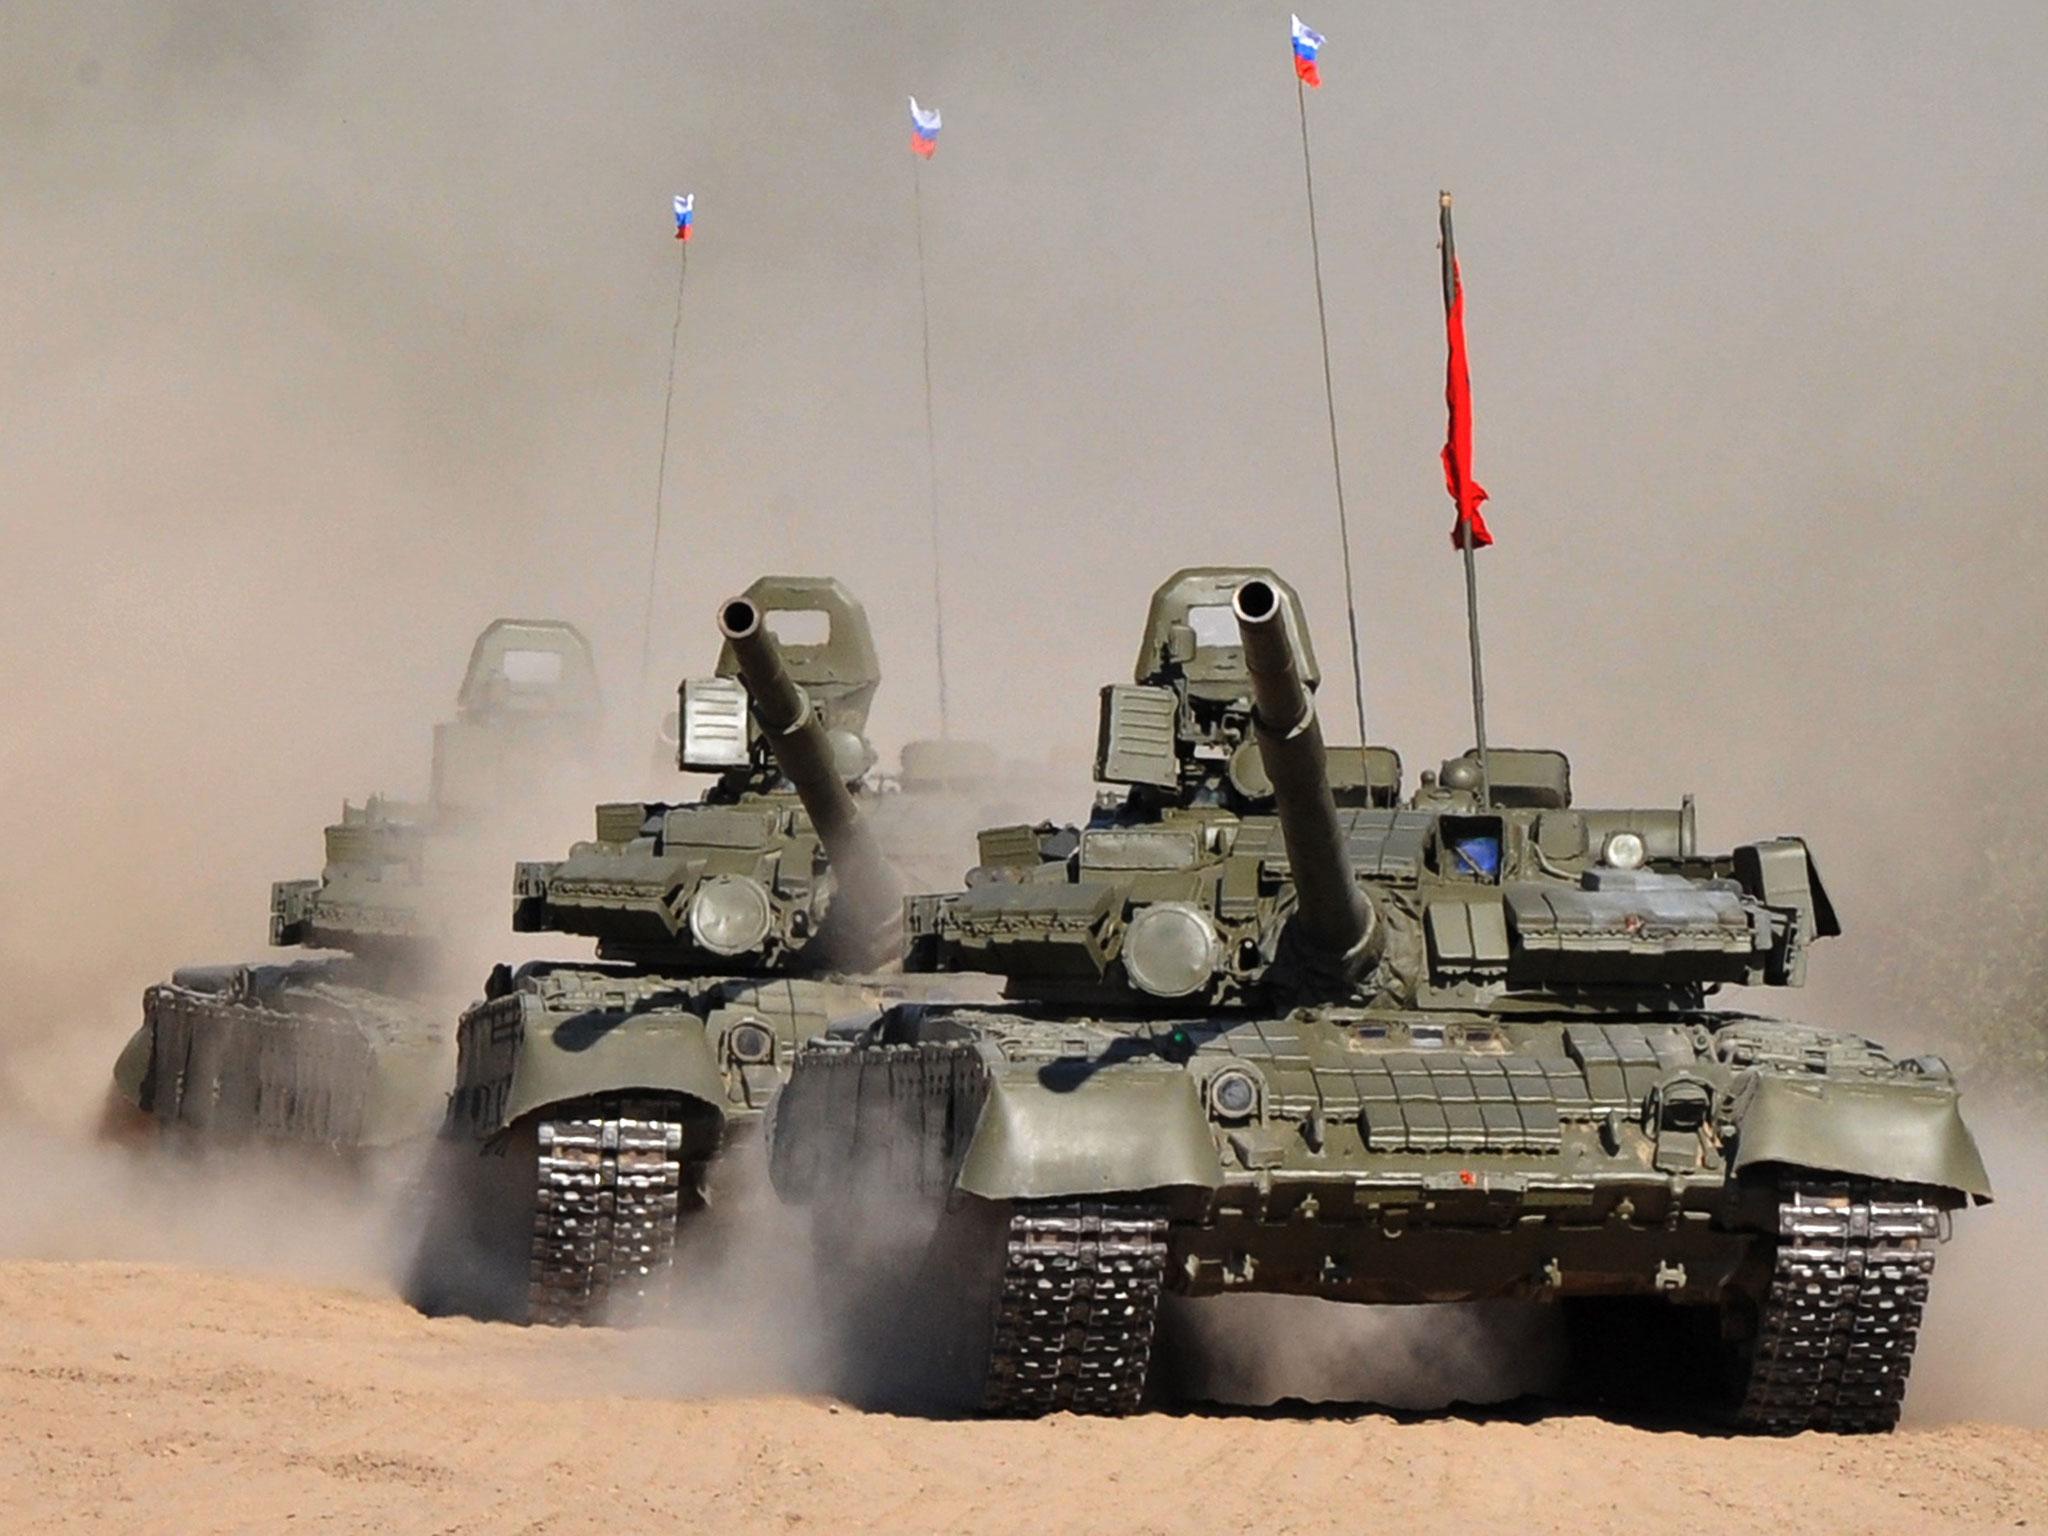 Russia's T-80 battle tanks entered service in 1976. Around 550 are still in use by the Russian military